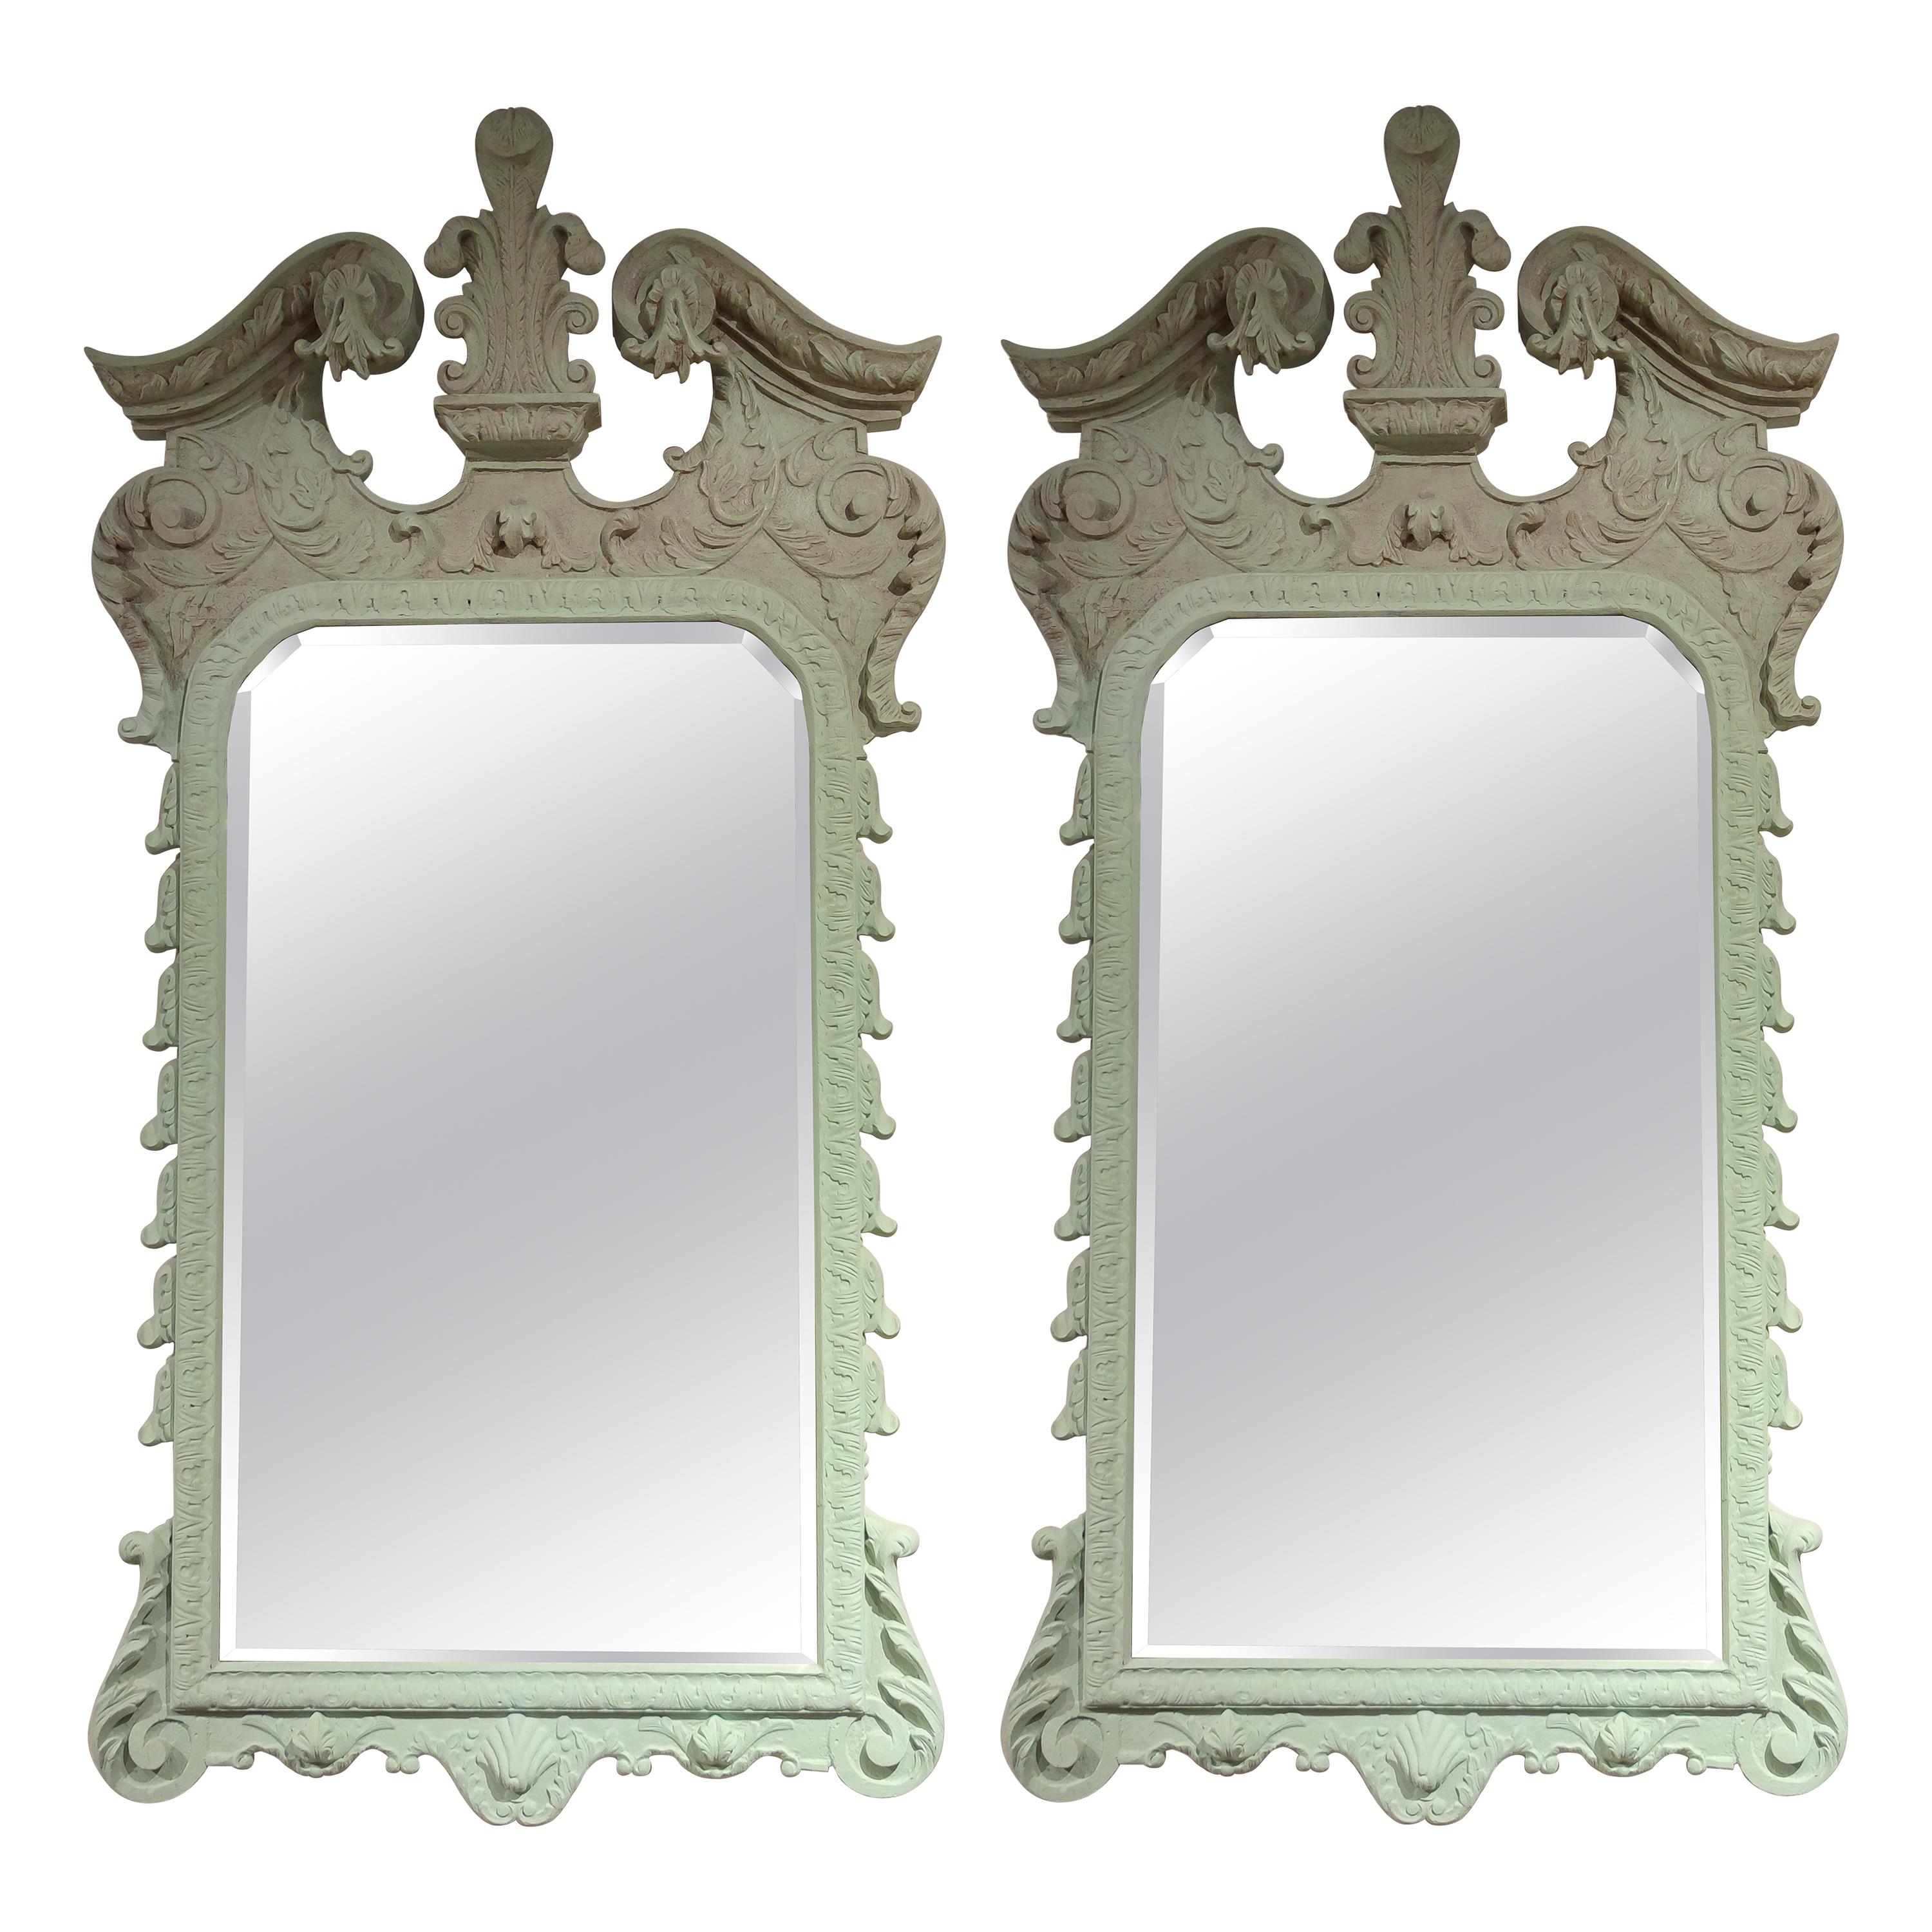 Pair of 1980s Spanish Wooden Mirrors Painted Green